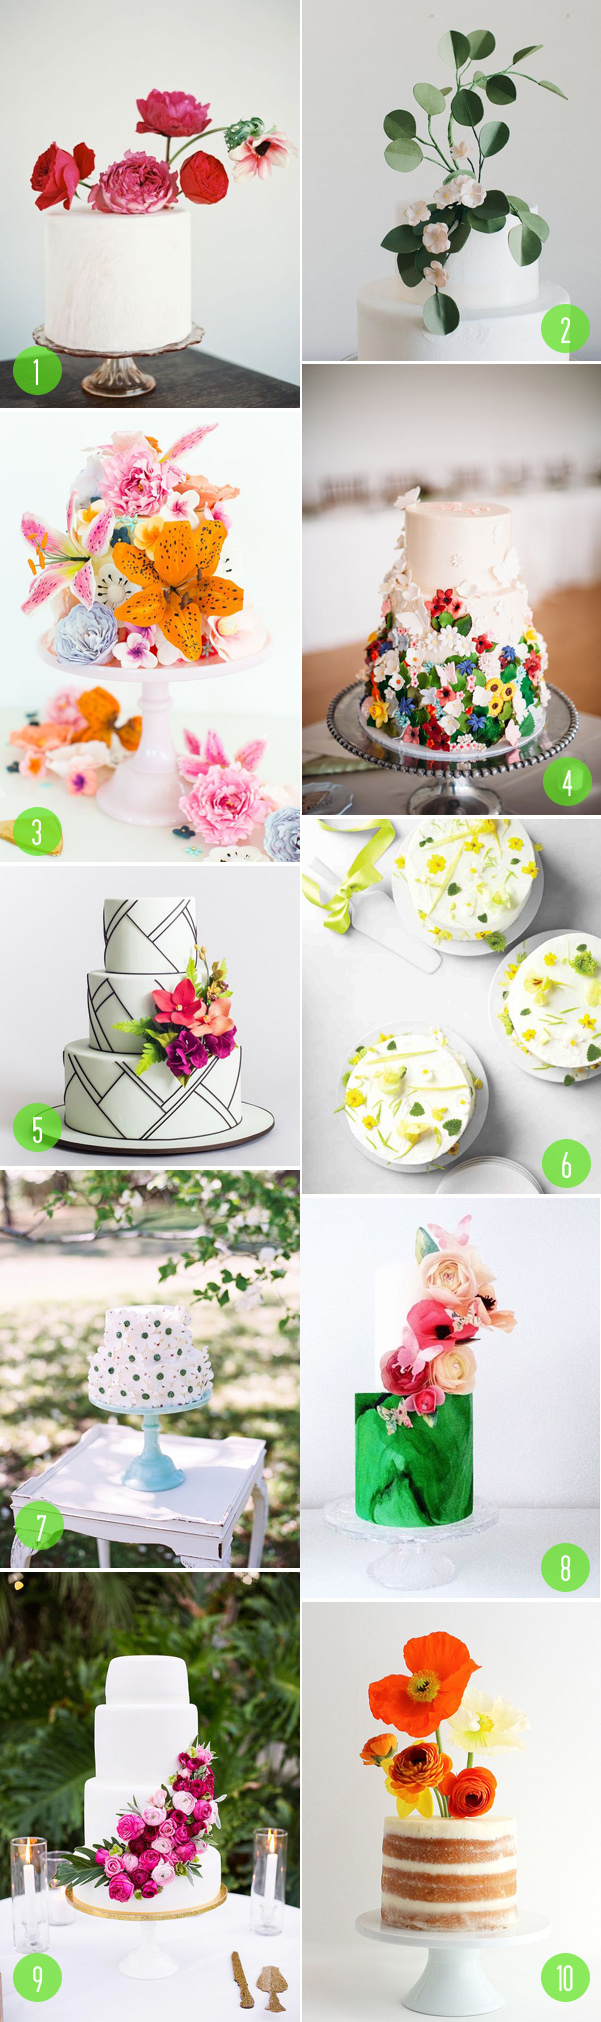 Top 10: Floral cakes